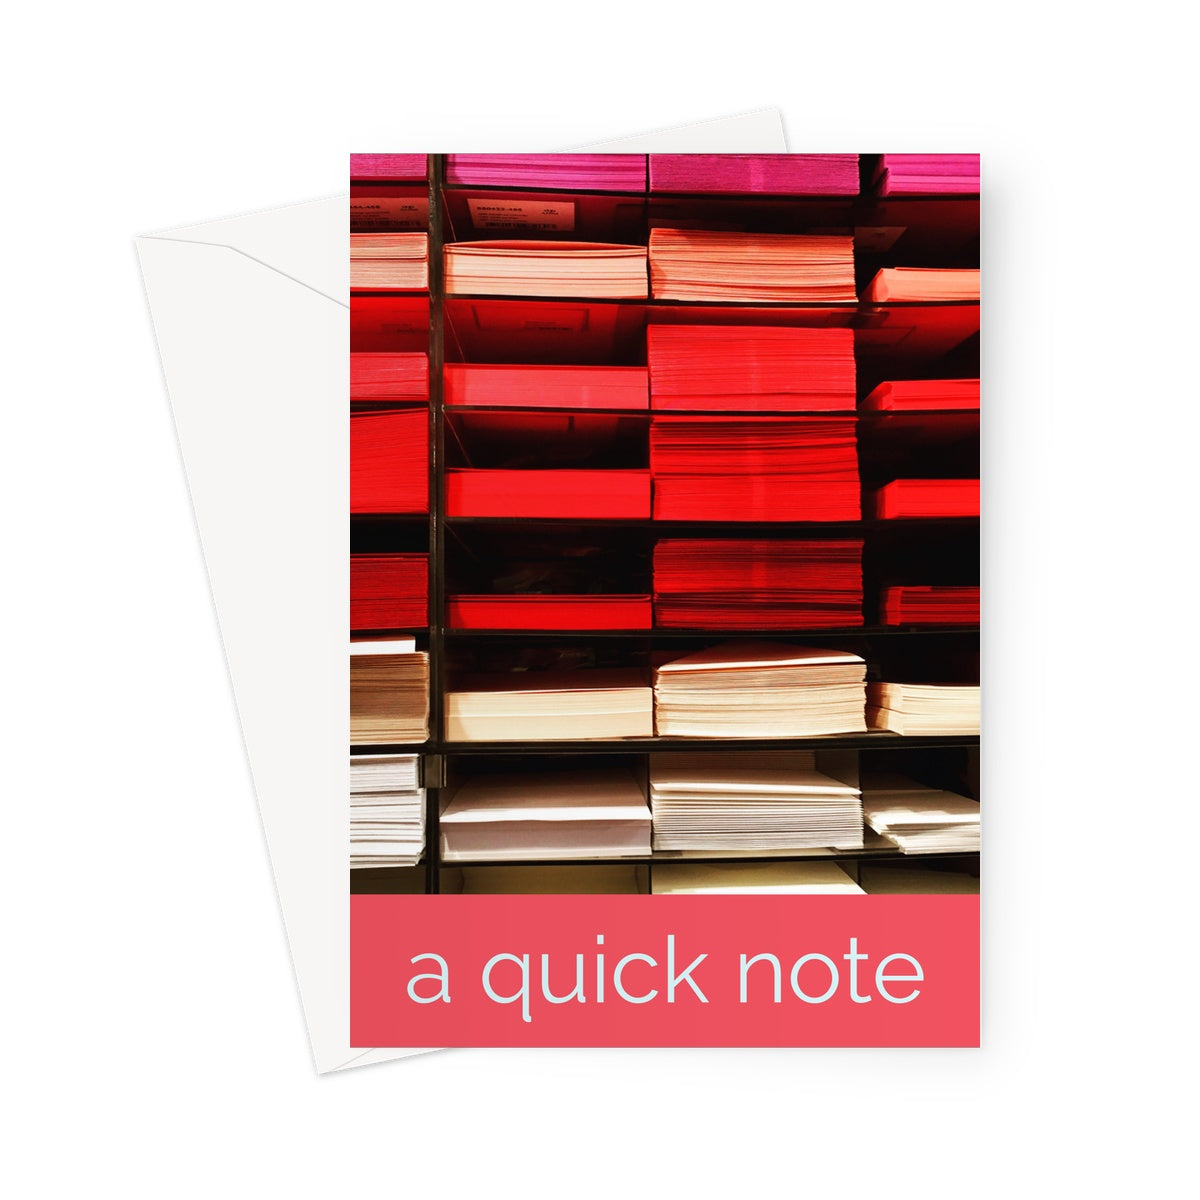 A shelf of coloured sheets of paper ranging from pink, red to yellow and white in a photo greeting card or notecard. A salmon coloured strip at the bottom of the card denotes the words "a quick note" | Billington Pix Greeting Cards